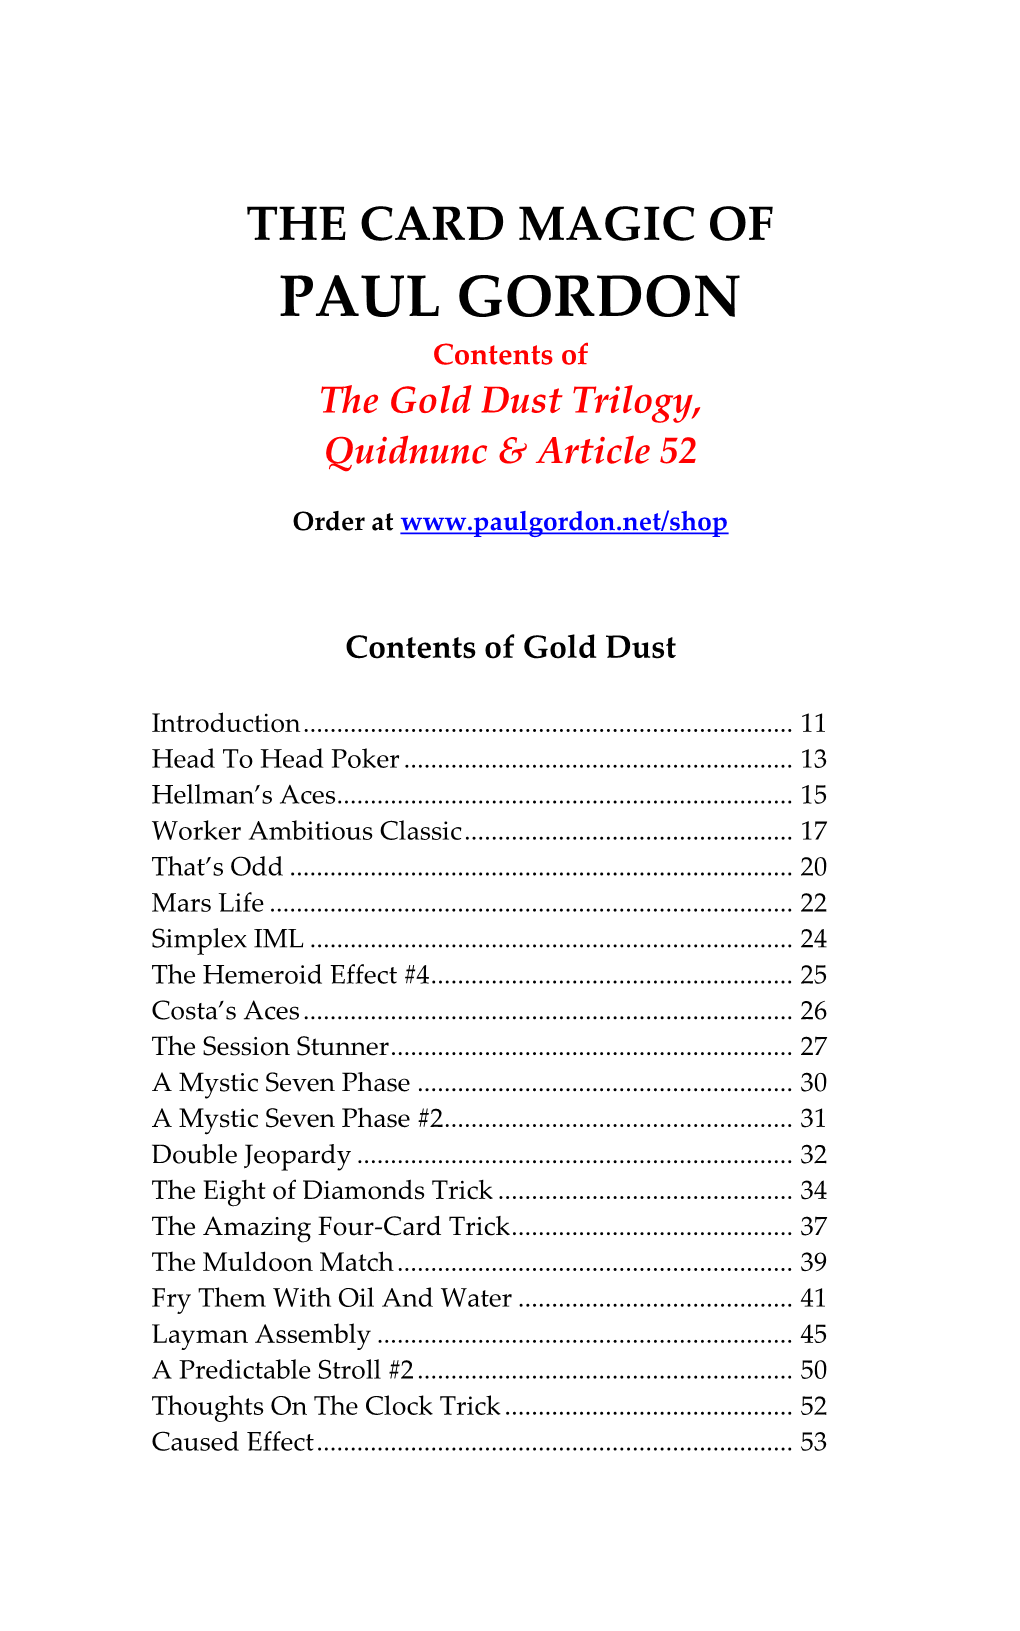 THE CARD MAGIC of PAUL GORDON Contents of the Gold Dust Trilogy, Quidnunc & Article 52